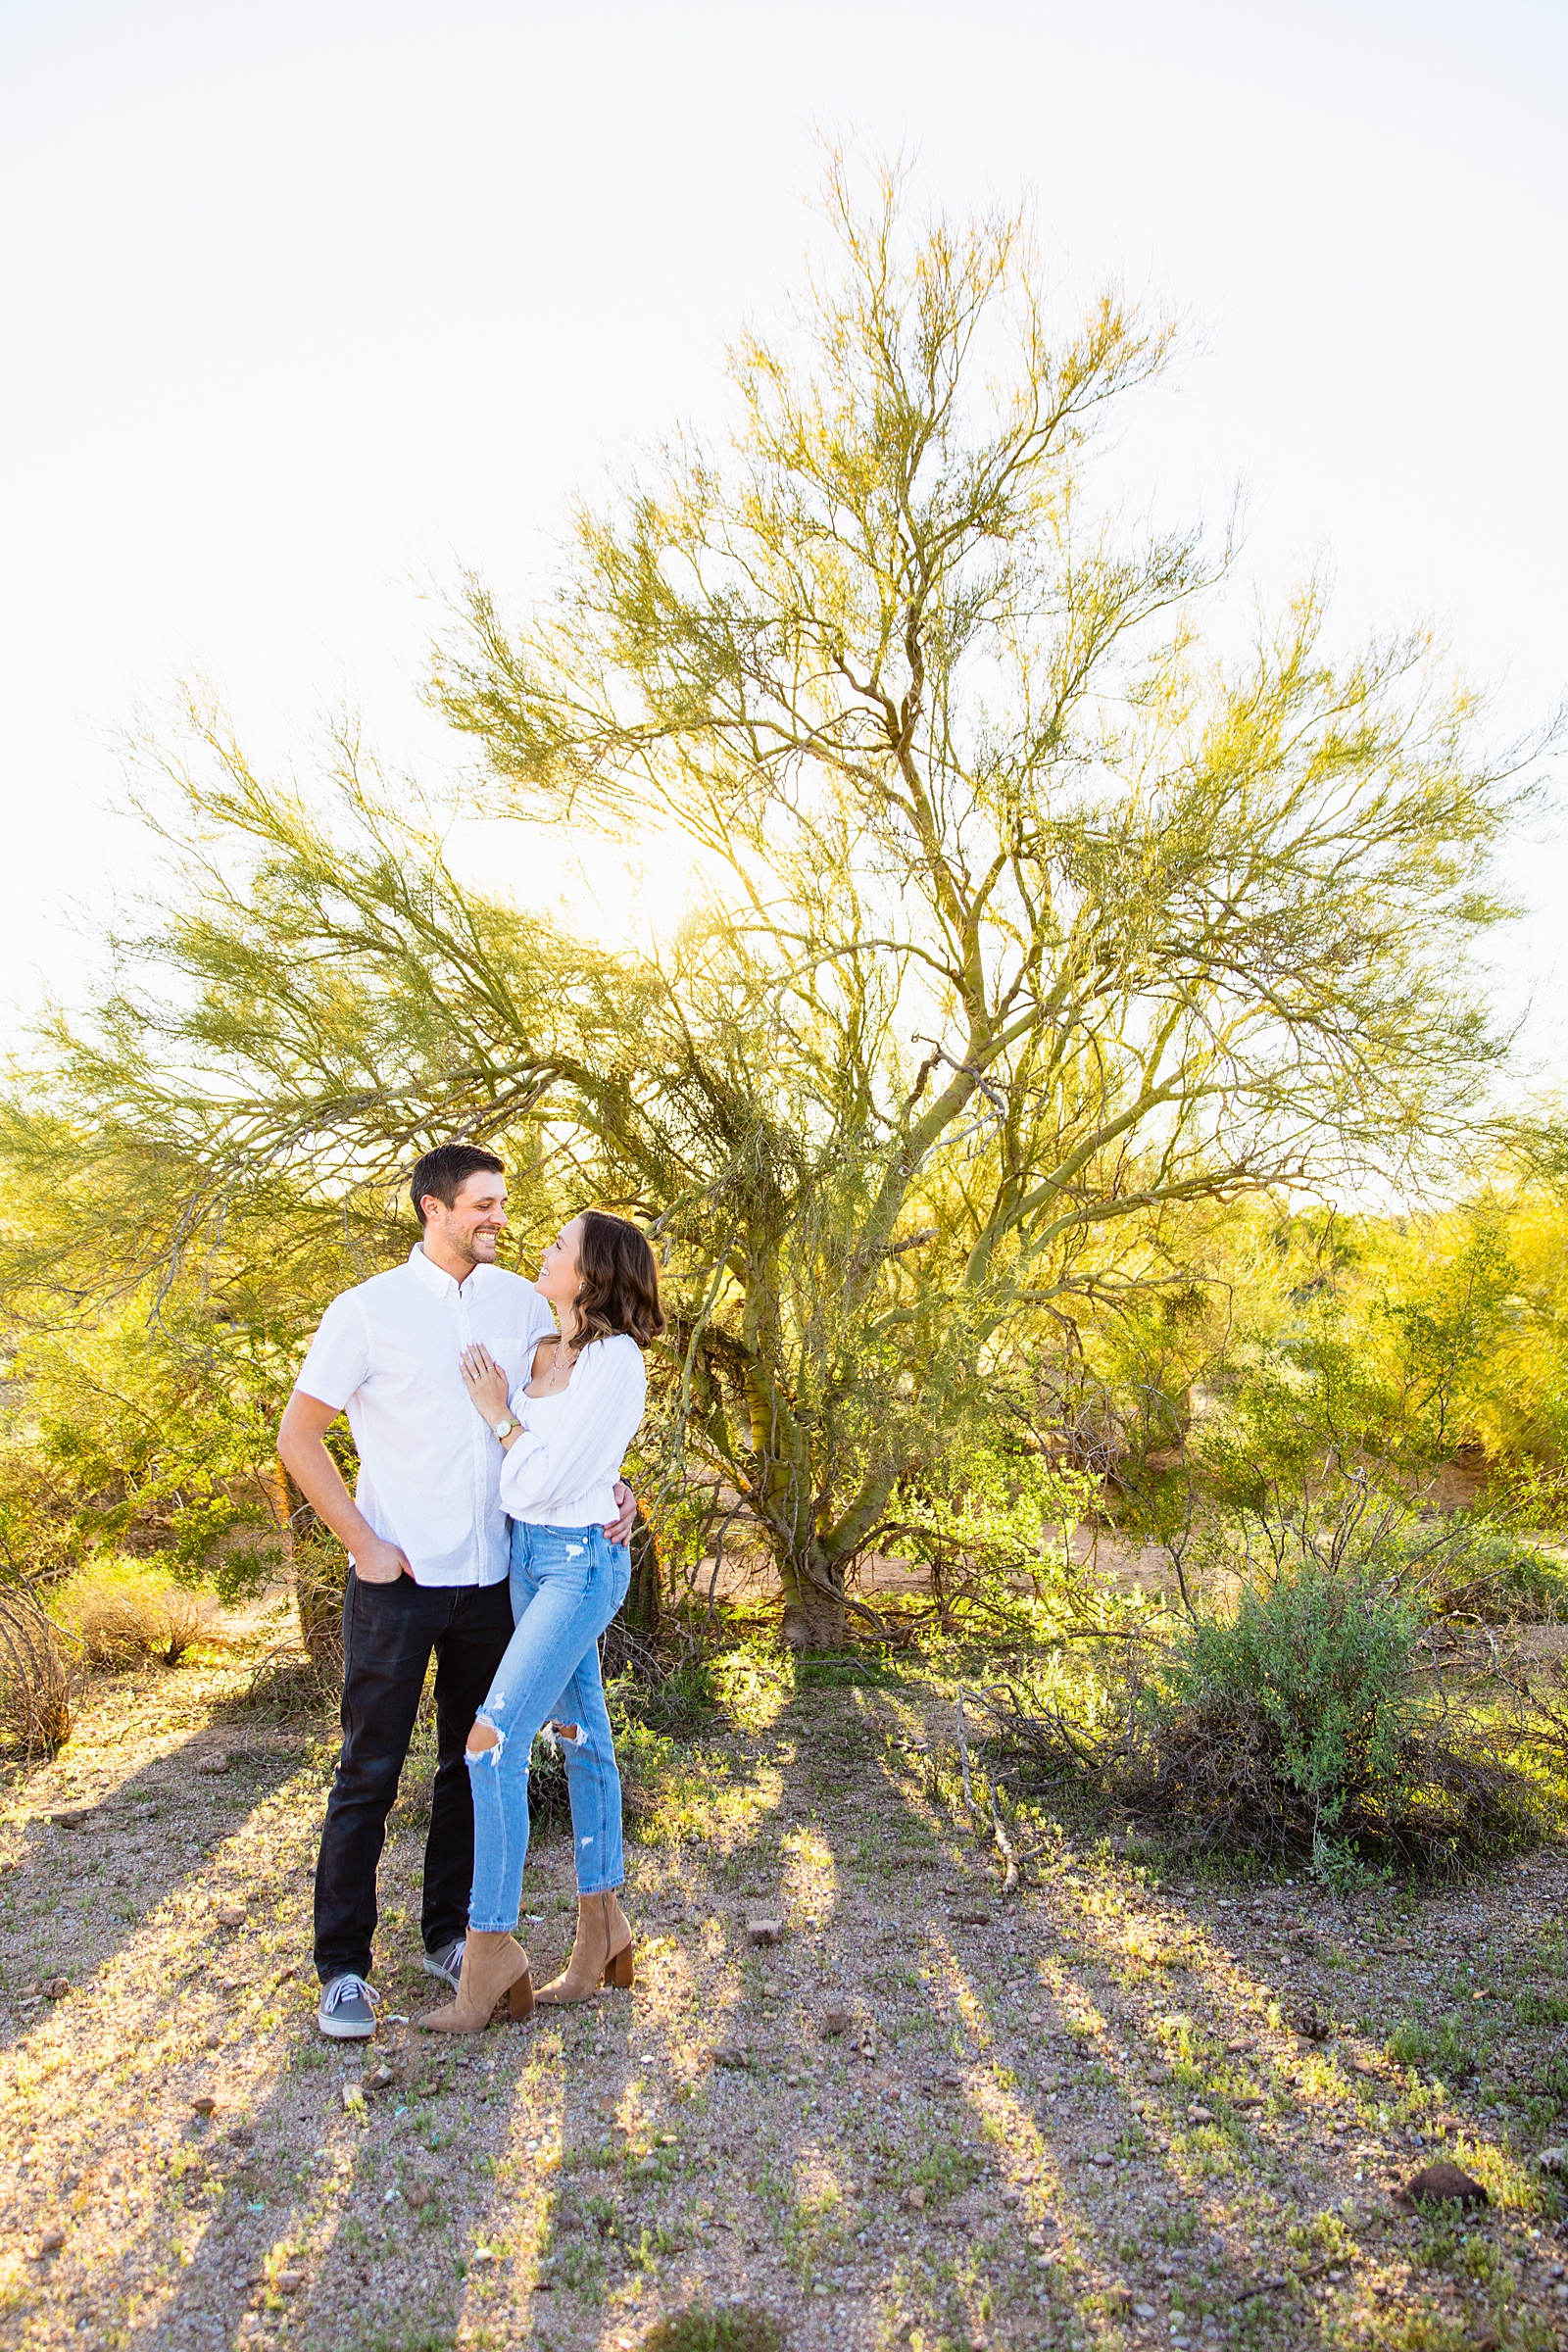 Couple look at each other during their Phoenix engagement session by Arizona wedding photographer PMA Photography.